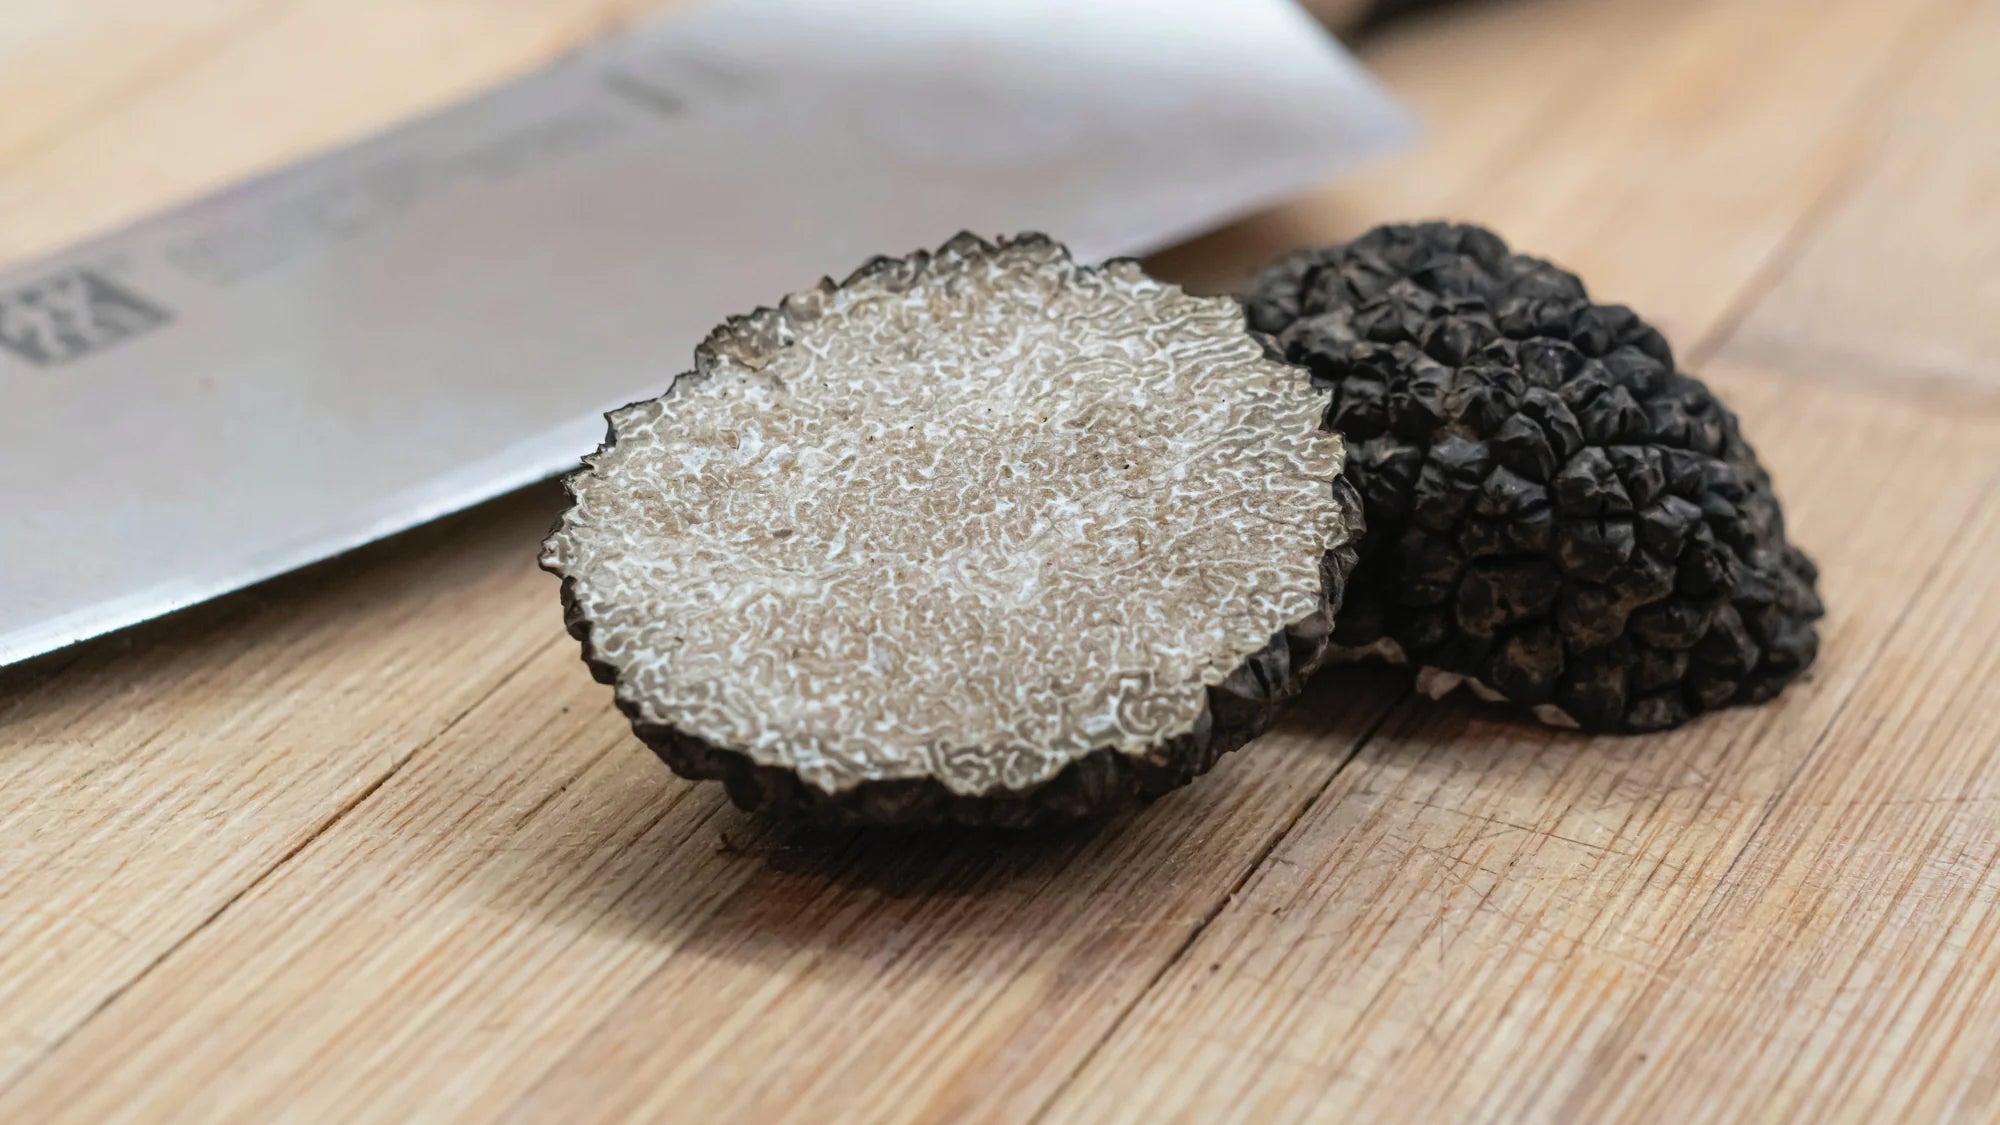 WHAT ARE TRUFFLES?